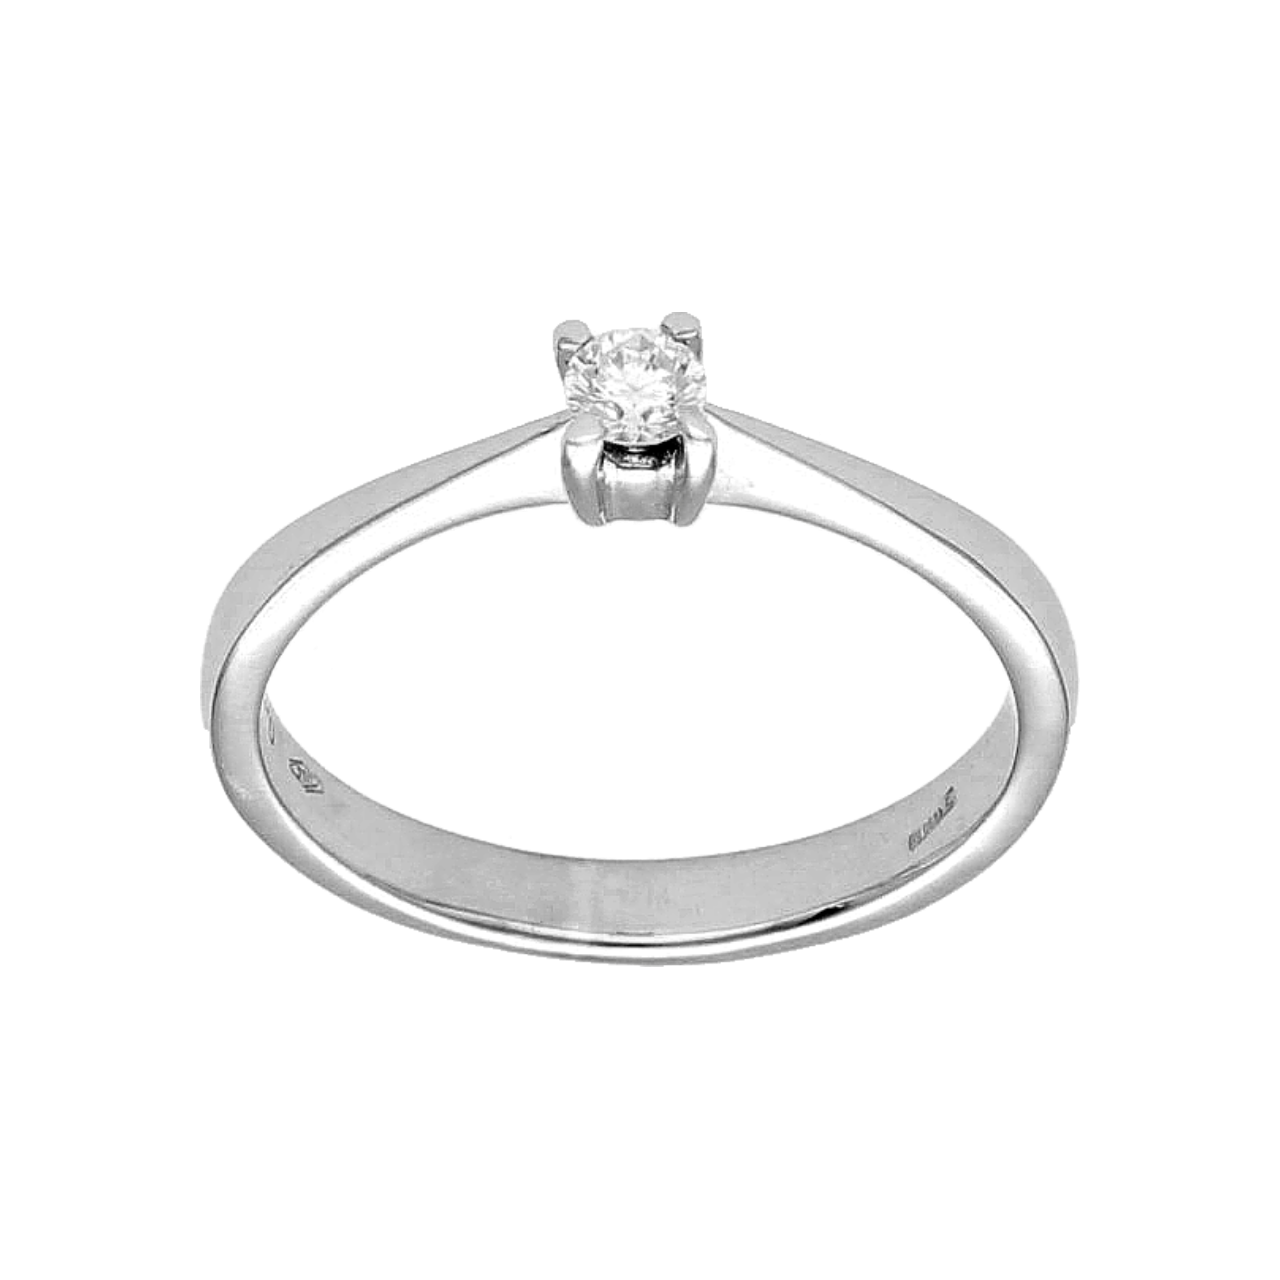 Solitary ring white gold with diamonds 0.10 ct.